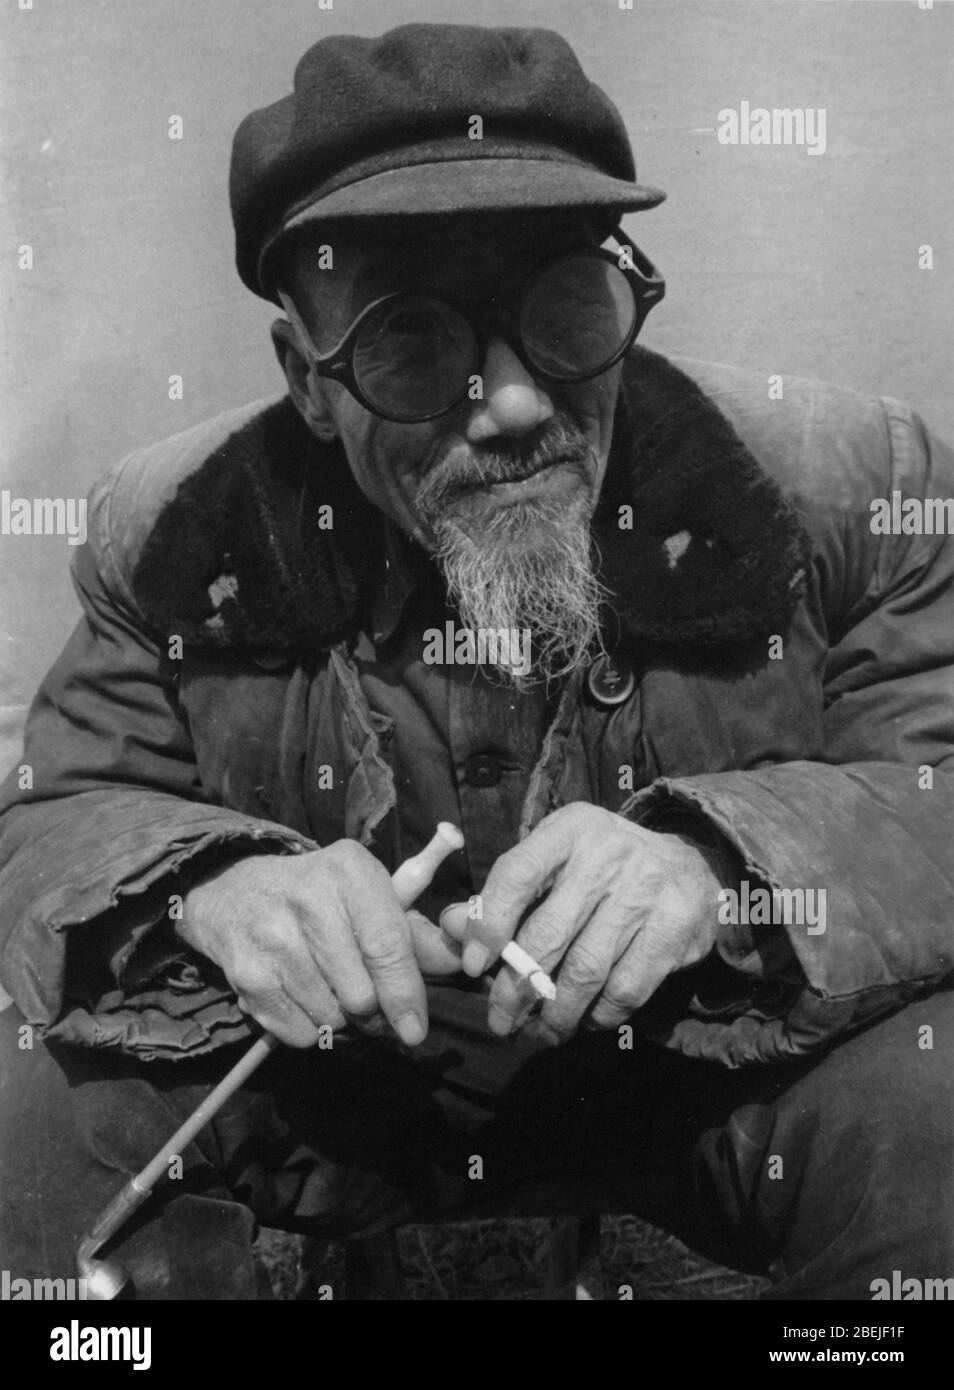 Old man smoking a cigarette Stock Photo